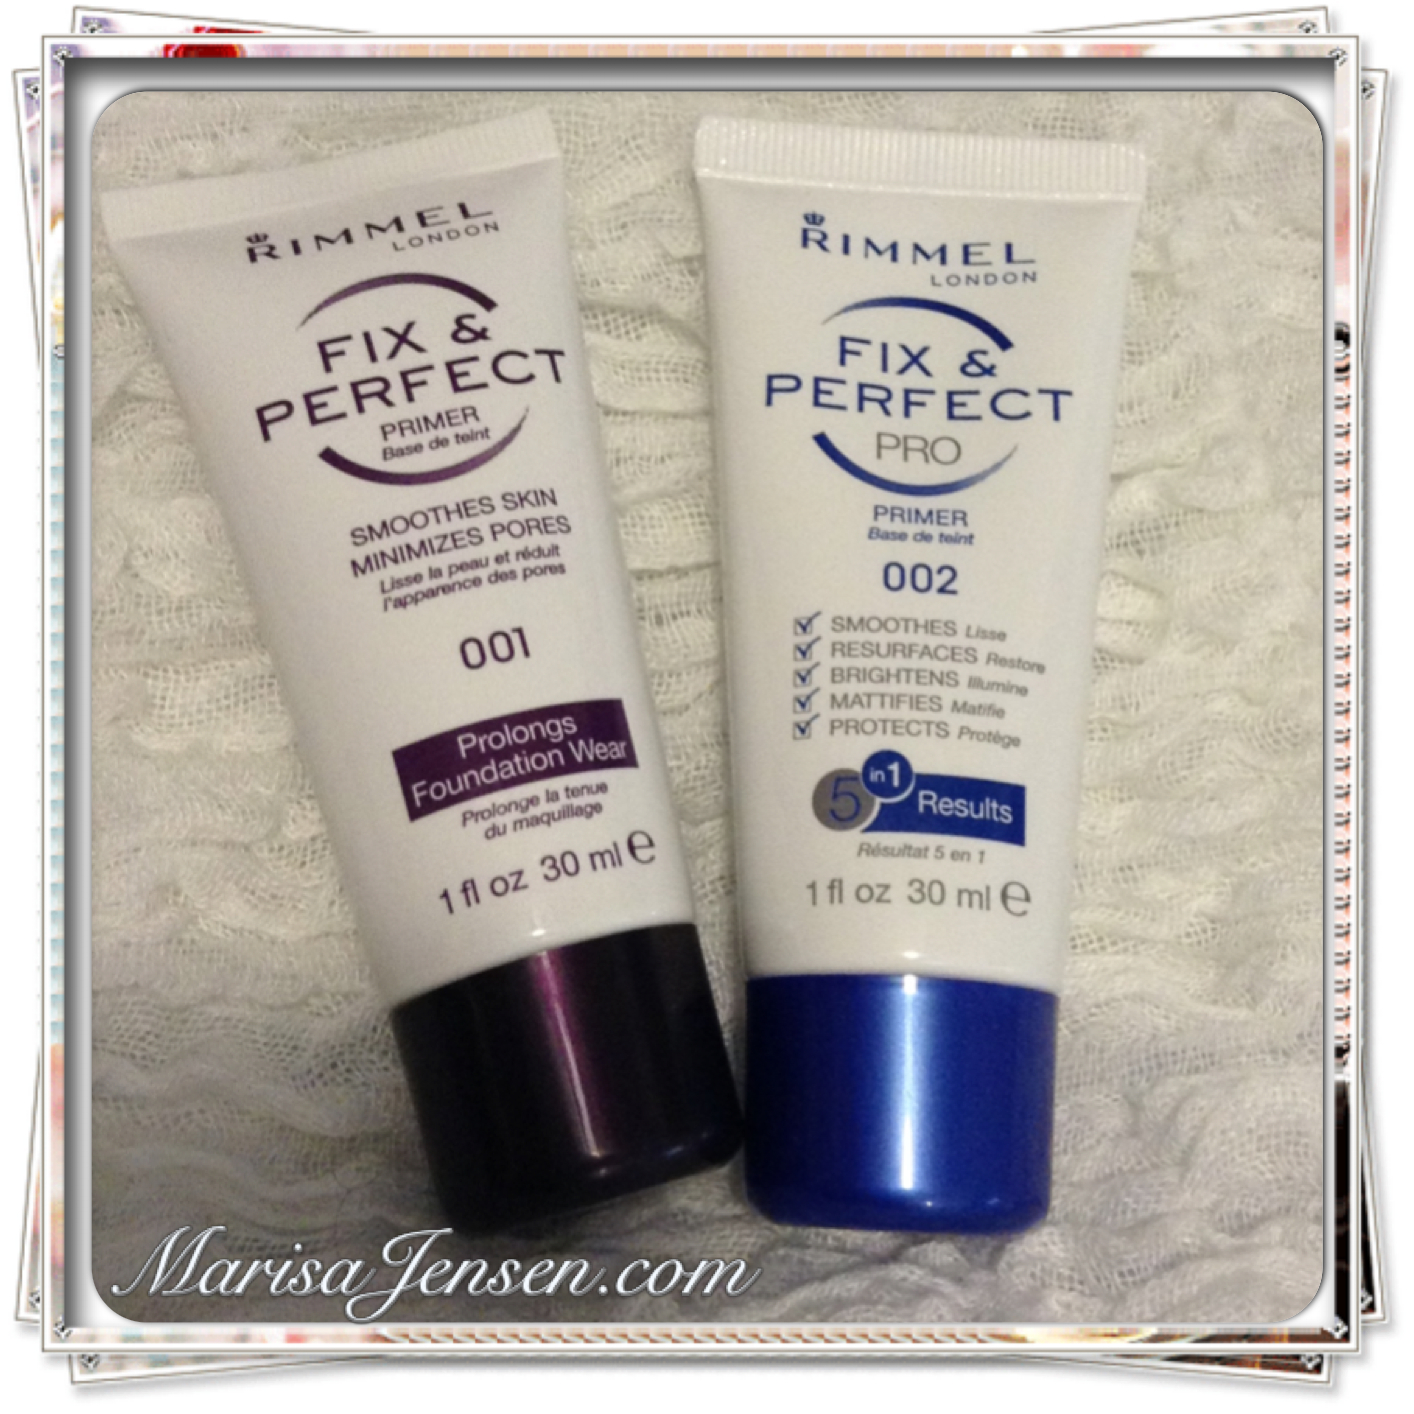 Absoluut Iedereen Volwassenheid Marisa Jensen: Rimmel Double Review on Both of their Fix & Perfect Face  Primers